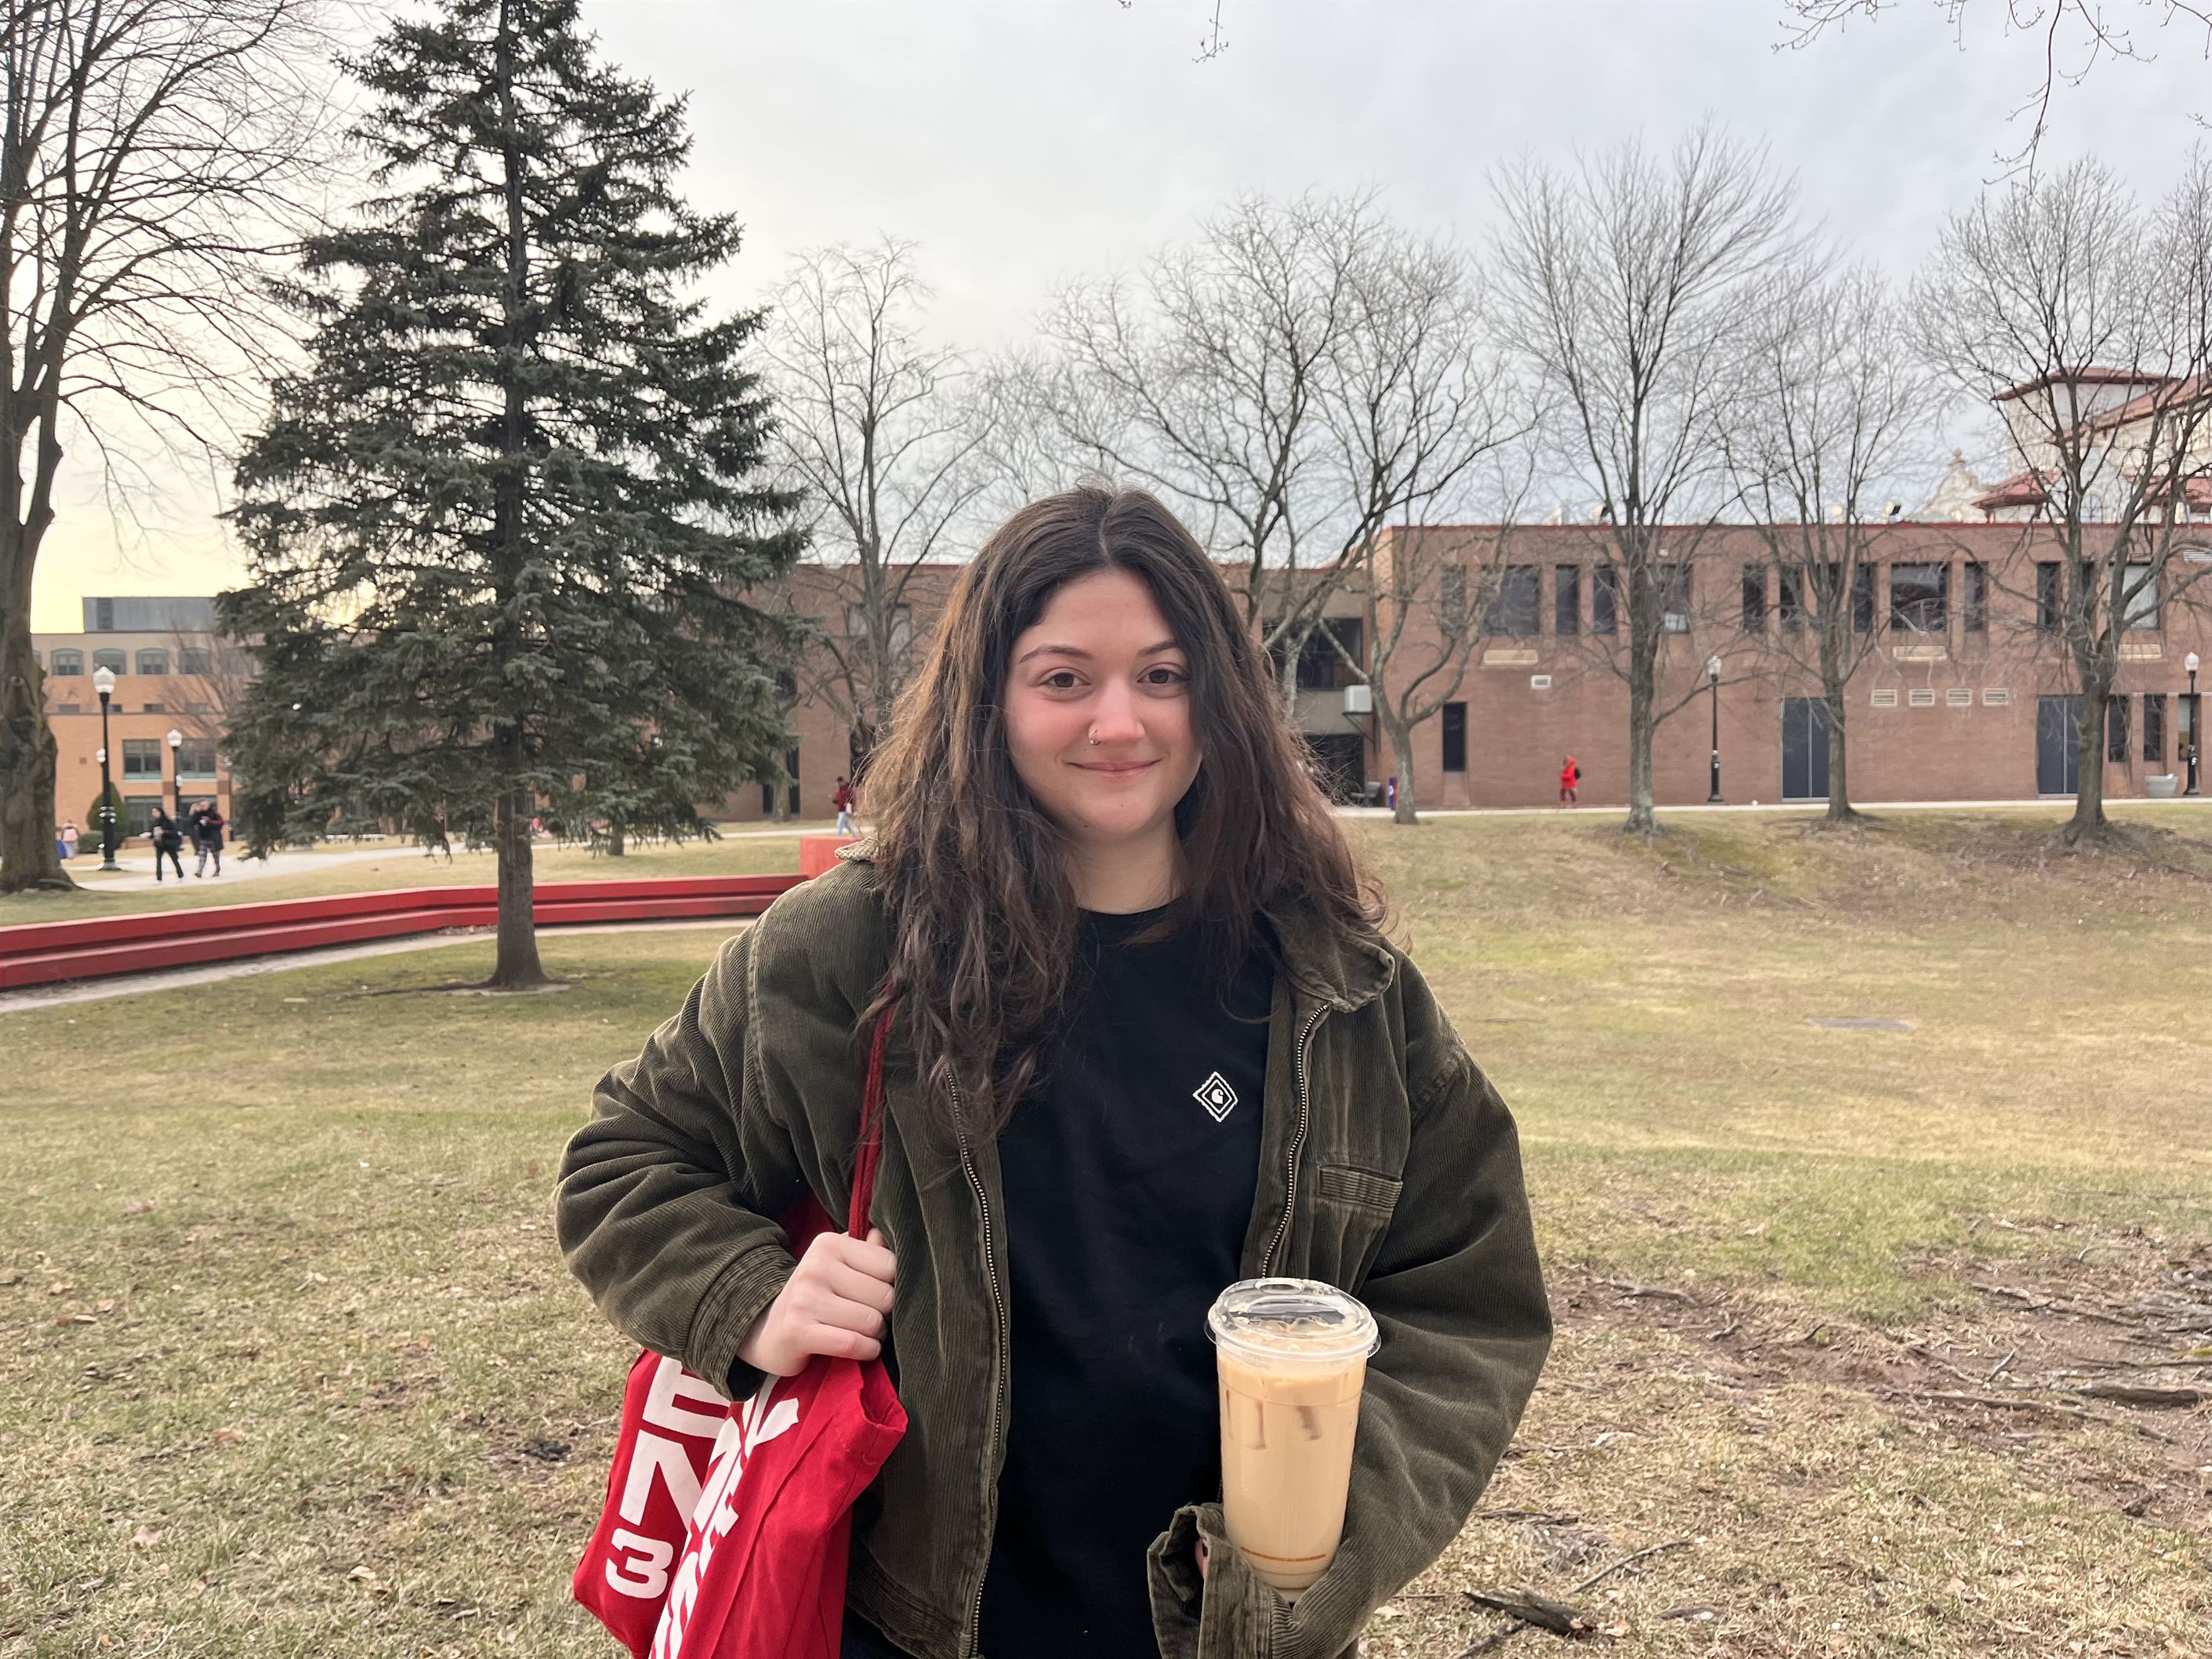 Carly Delucca is satisfied with her time for commencement 
Hannah Effinger | The Montclarion